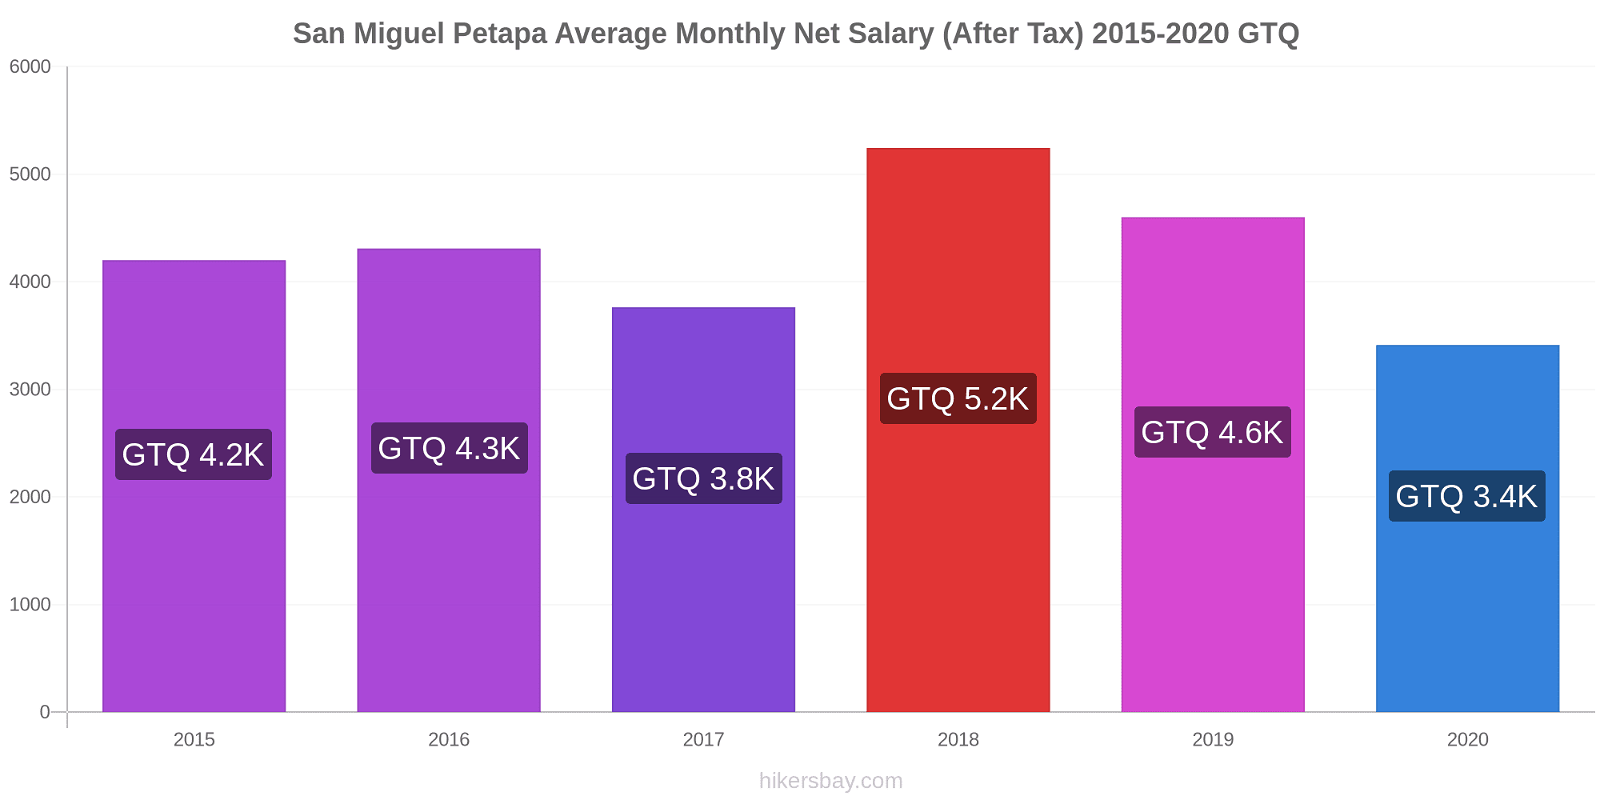 San Miguel Petapa price changes Average Monthly Net Salary (After Tax) hikersbay.com